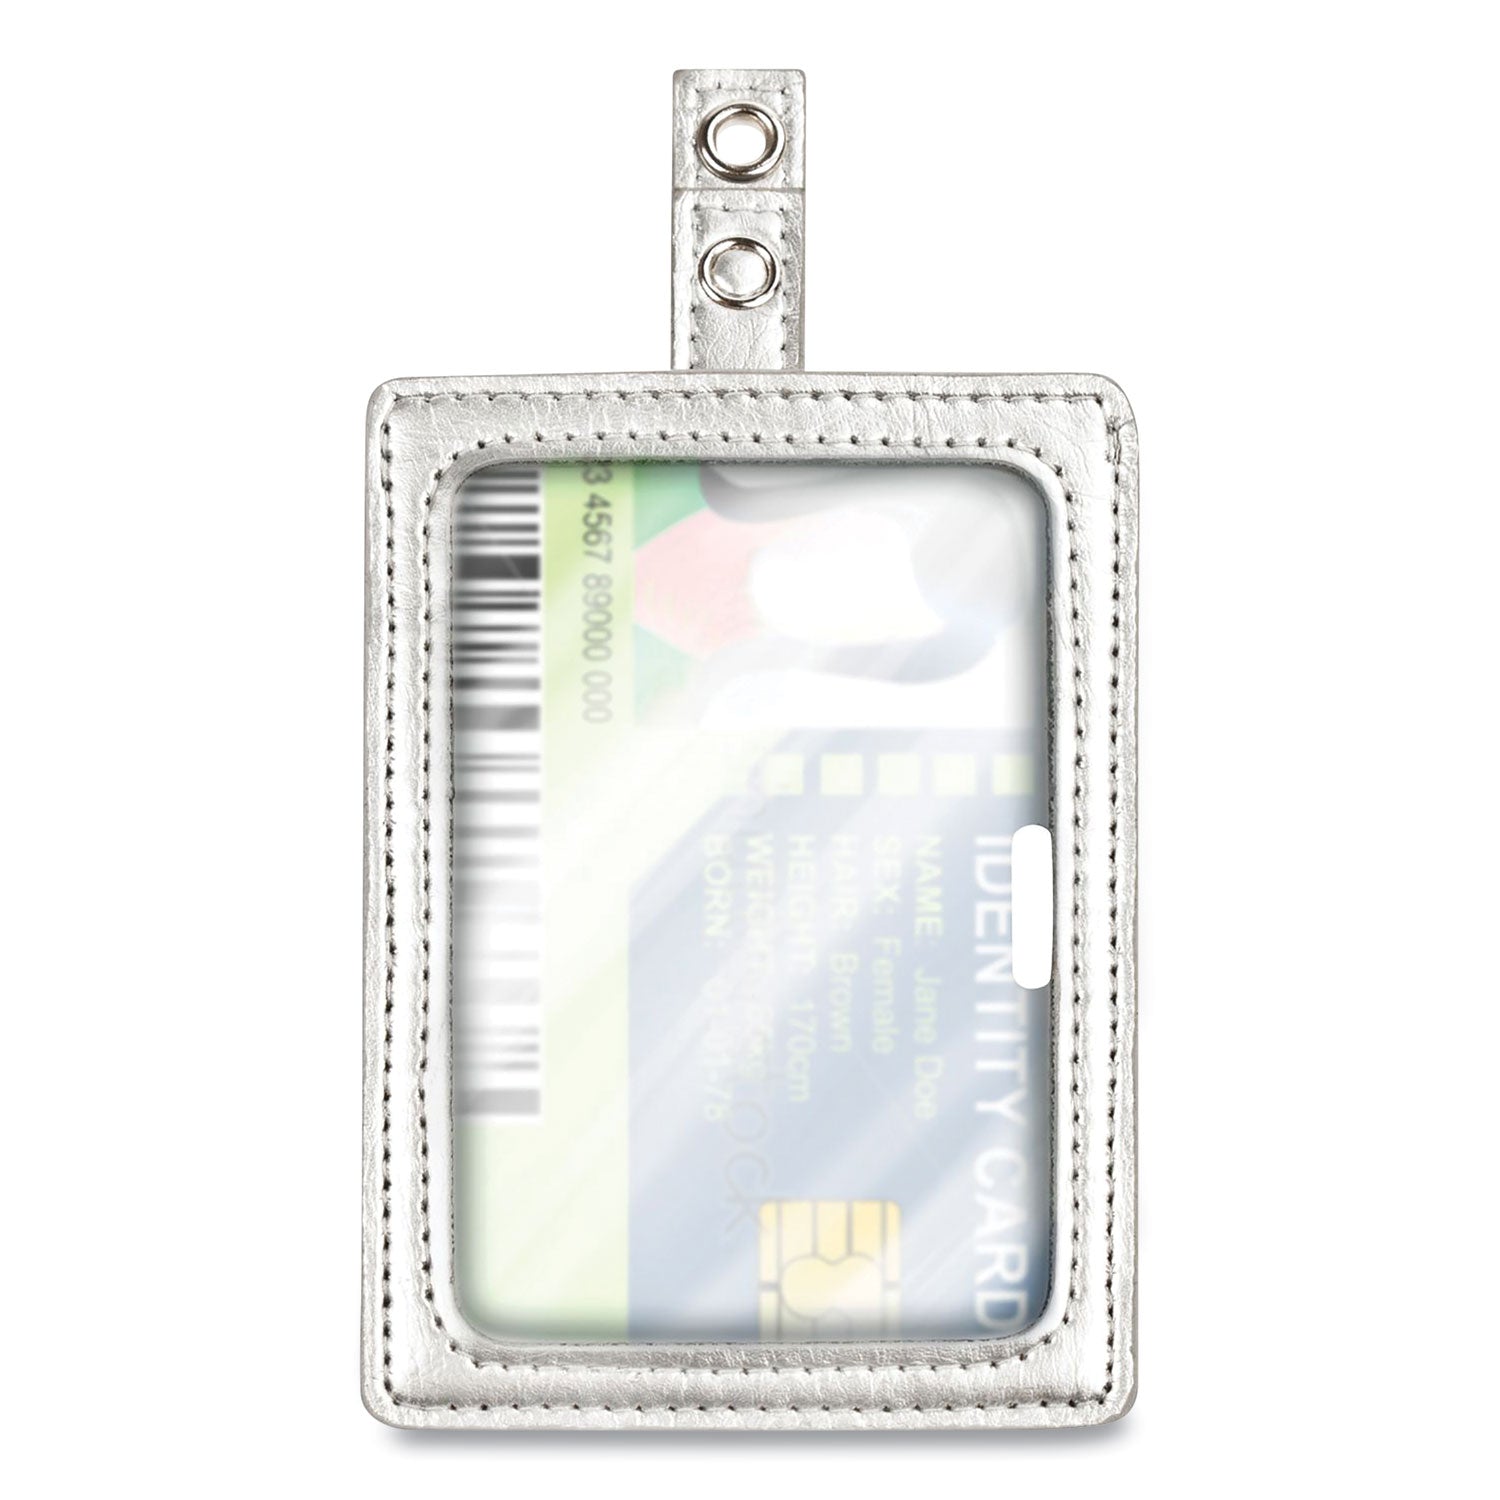 myid-leather-id-badge-holder-vertical-horizontal-25-x-4-silver_cos075004 - 1